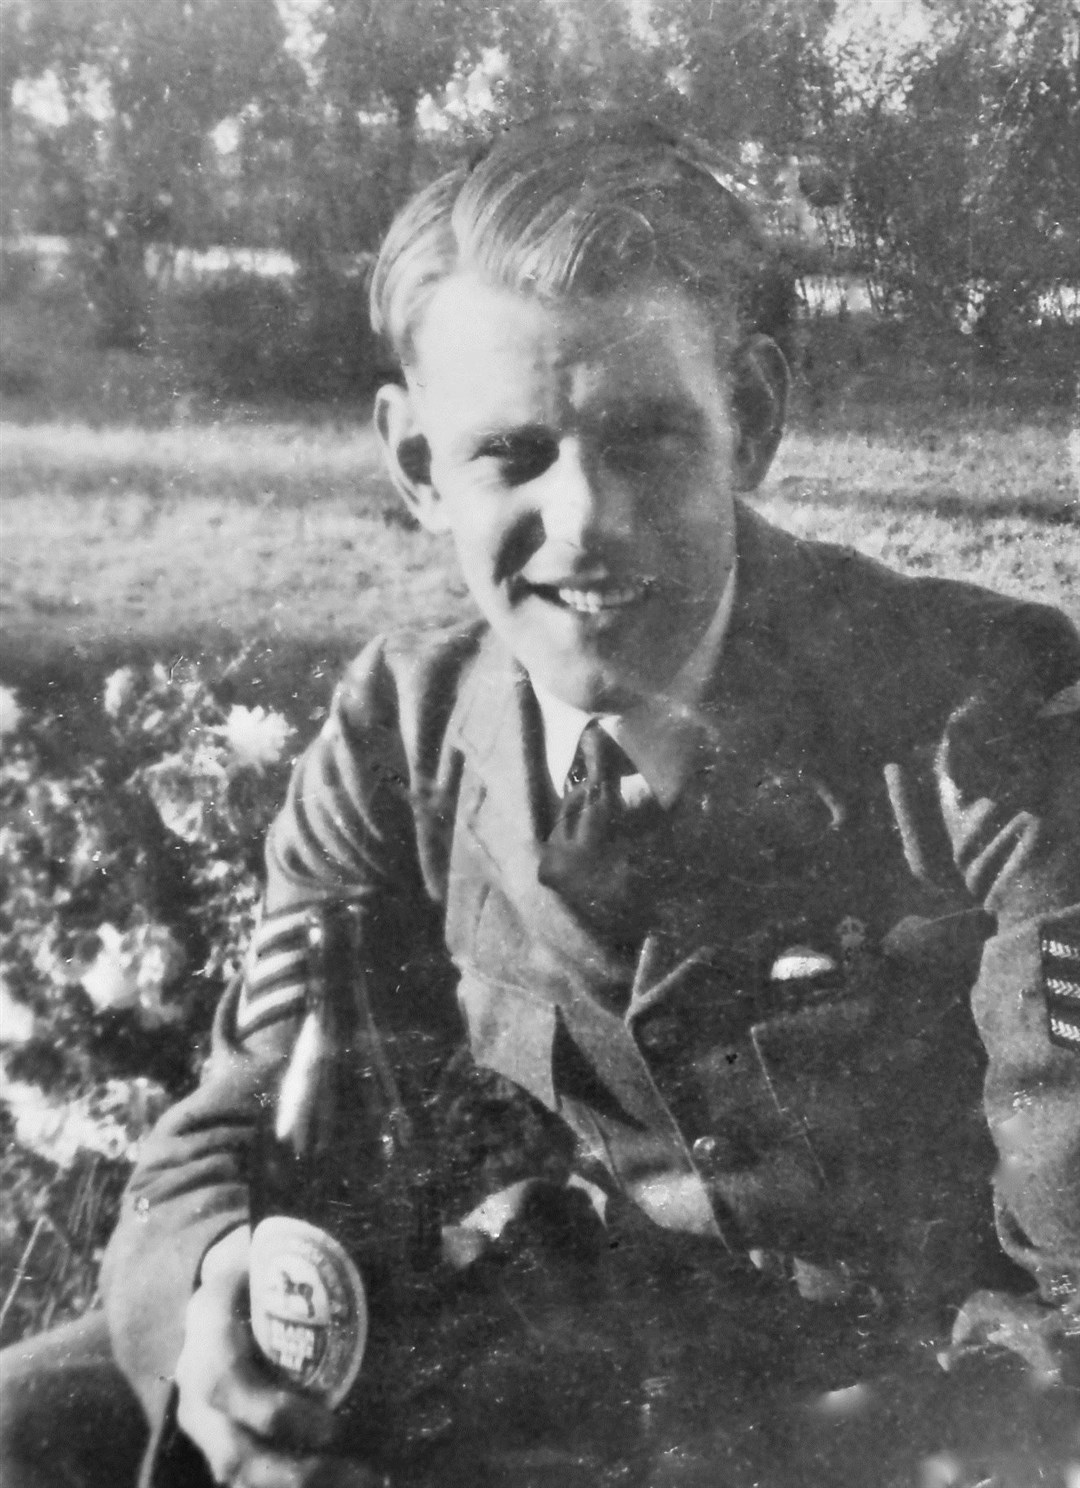 RAF Flt Sgt Ron Chapman, whose diary is featured in the podcast Blighty Thank God - enjoys a beer, Christmas 1943 in Bari, Italy where he was serving with 267 Squadron. One of the episodes tells of the secret missions he flew with 267 Squadron, supplying partisans in former Yugoslavia and Greece.